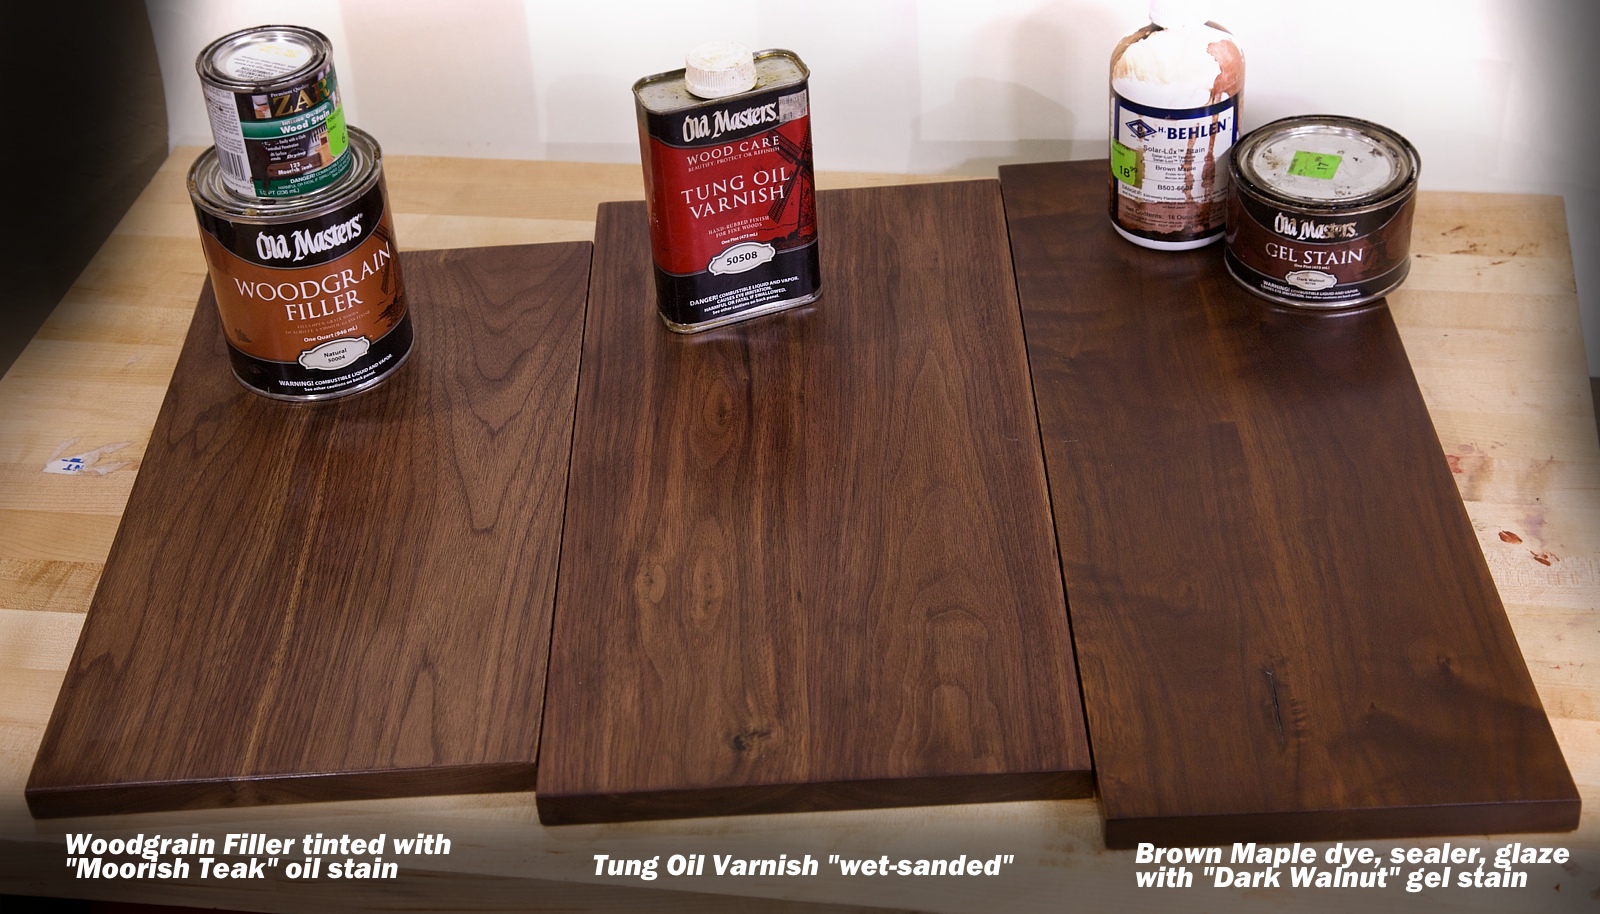 How Do You Make Oil Varnish? - Woodsmith Guides